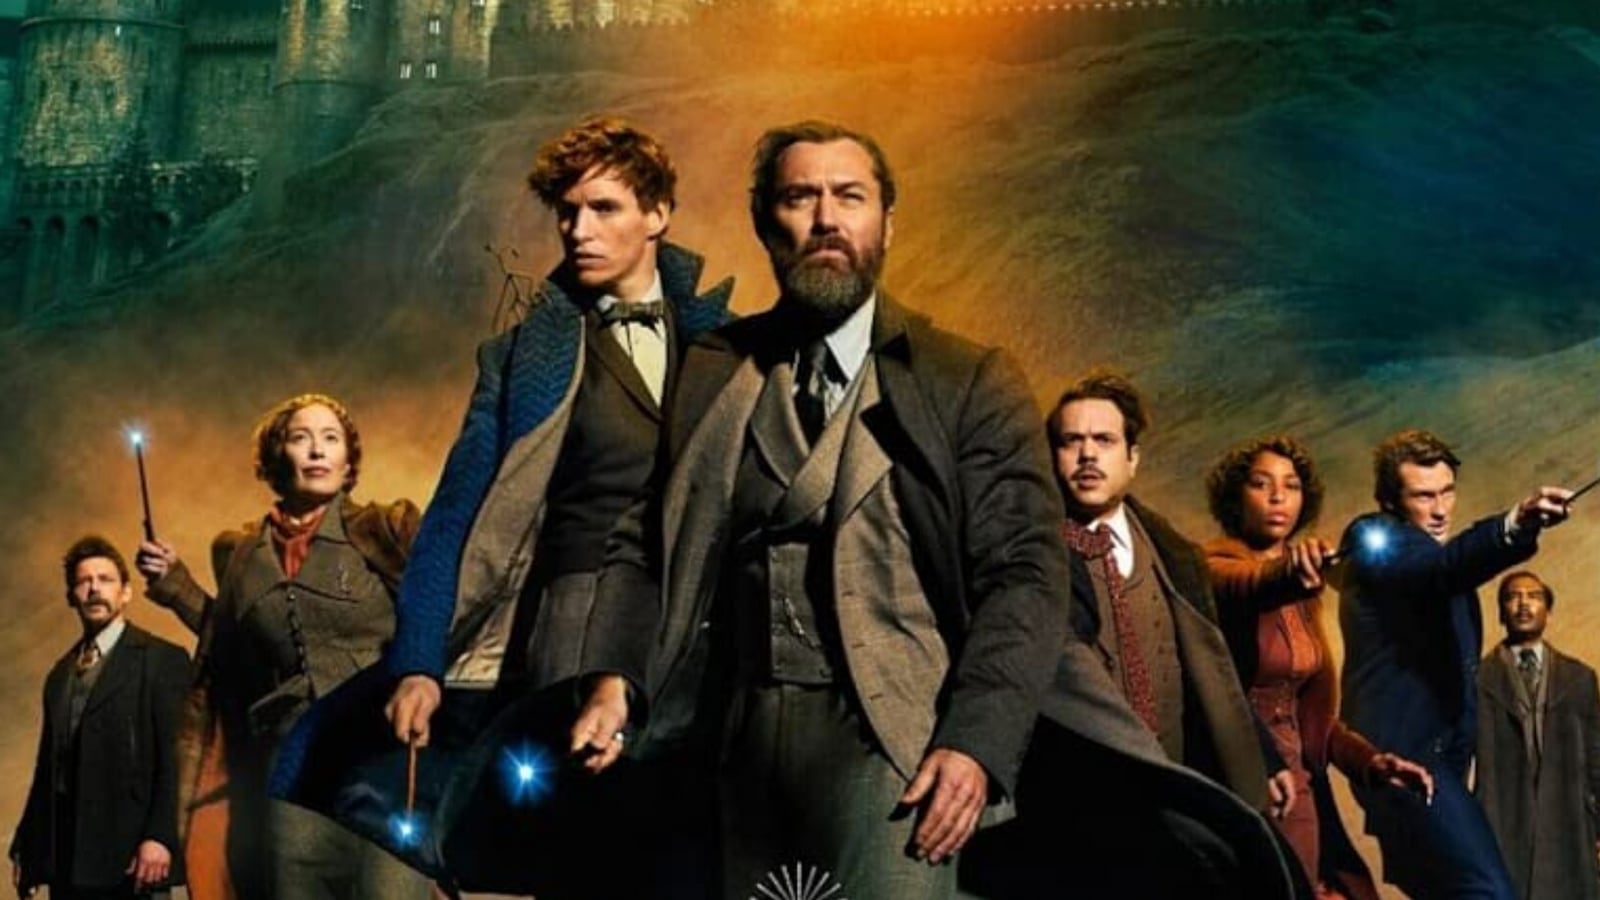 Fantastic Beasts The Secrets of Dumbledore movie review: A poorly crafted, painfully disjointed joyless slog